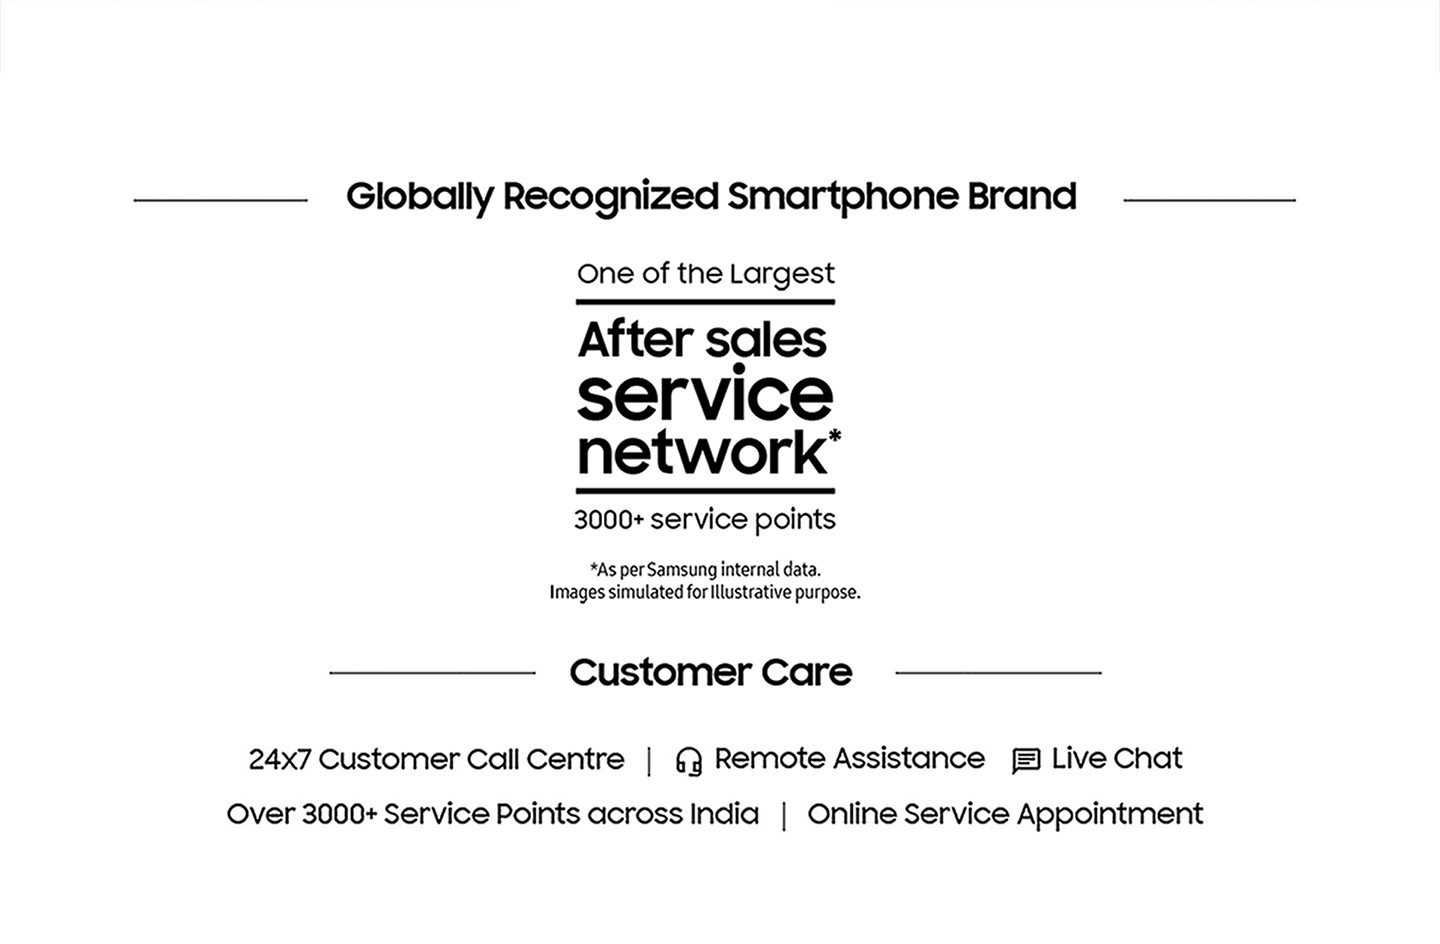 Globally Recognized Smartphone brand